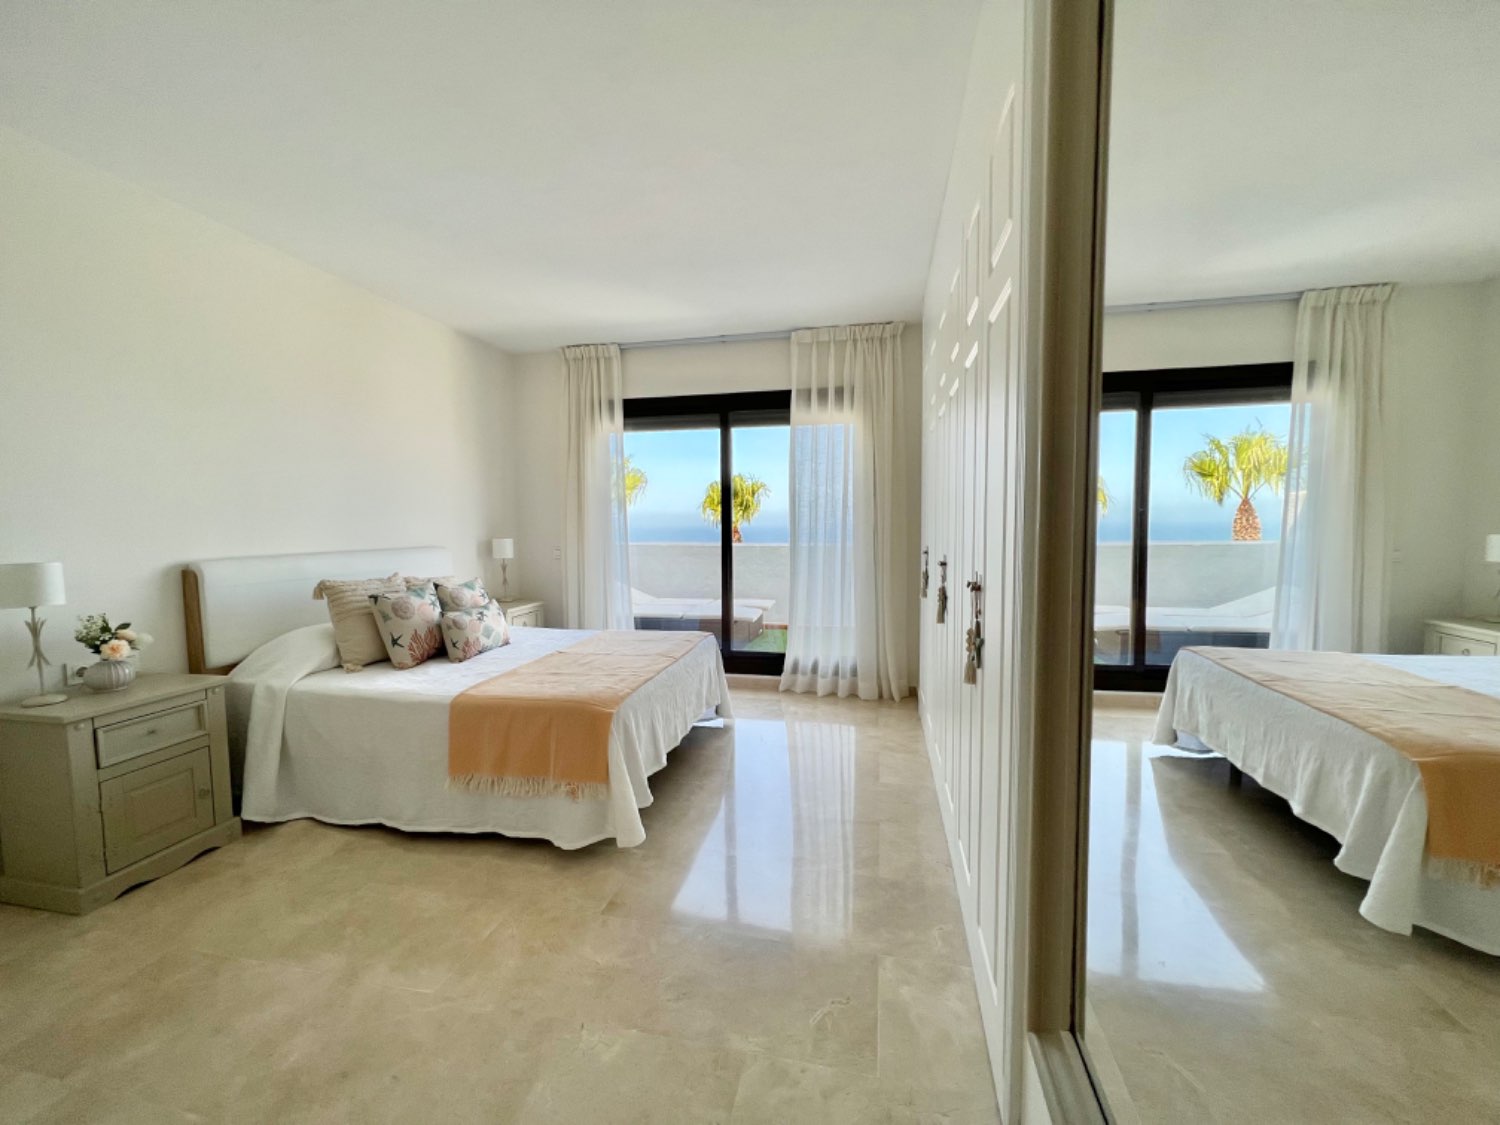 Splendid three-bedroom penthouse  with beautiful views in Alcaidesa, very close to the beach and golf